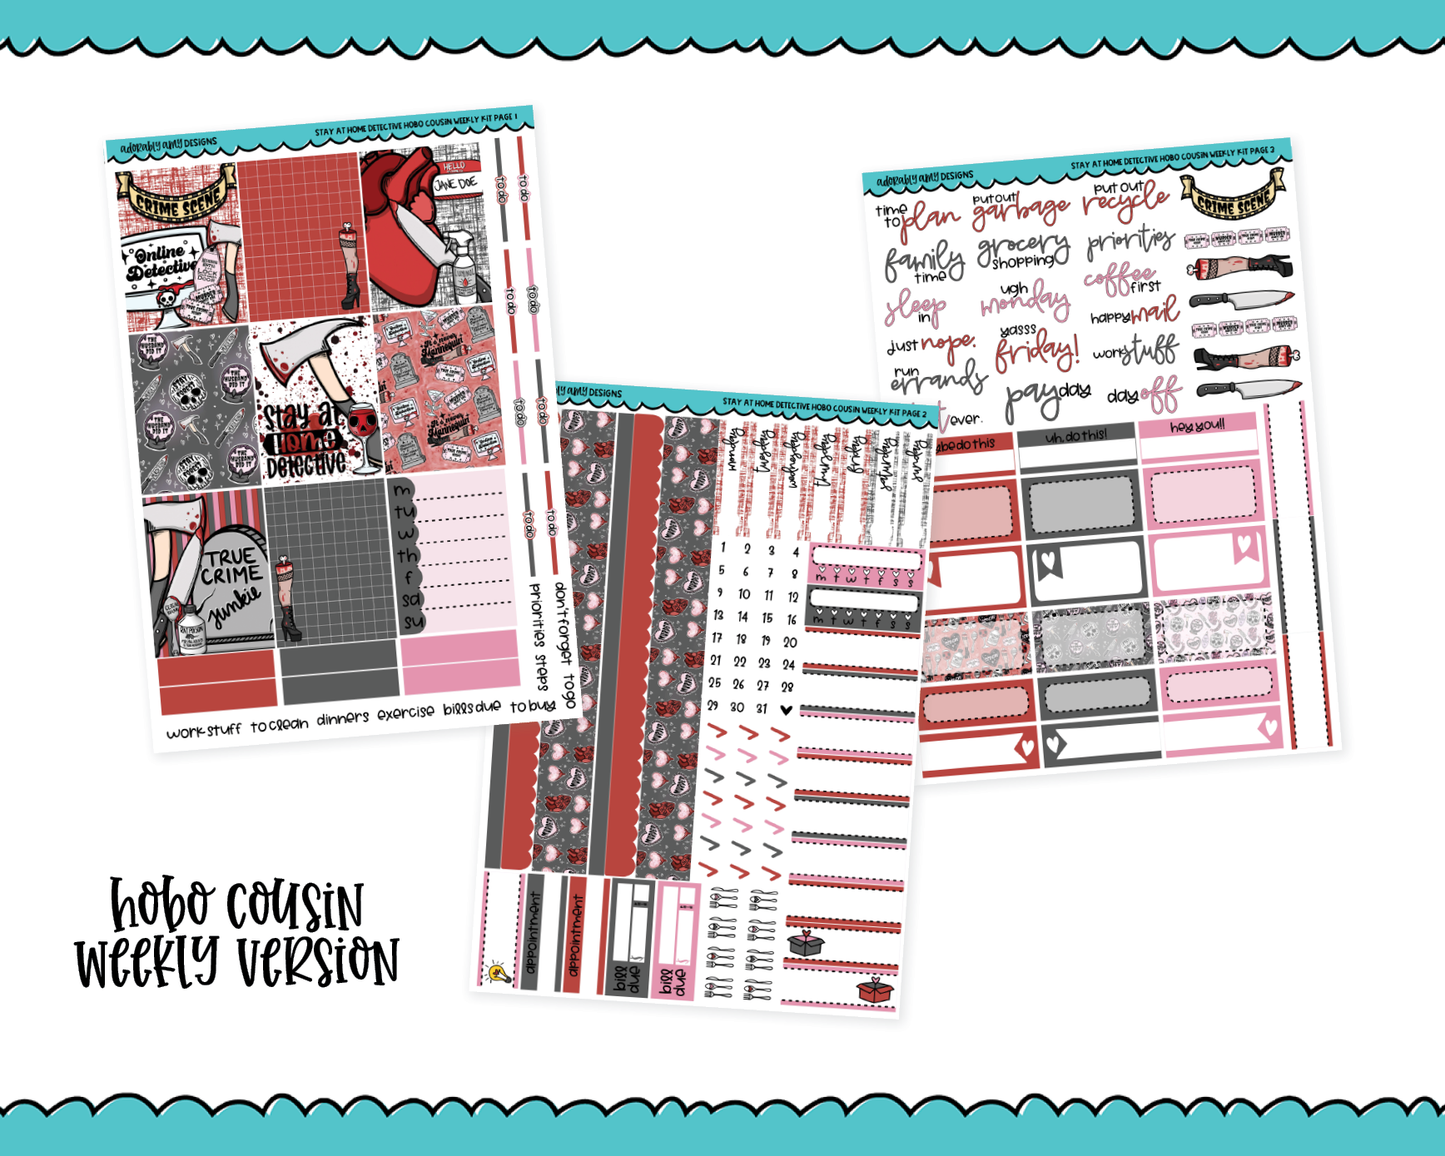 Hobonichi Cousin Weekly Stay at Home Detective True Crime Themed Planner Sticker Kit for Hobo Cousin or Similar Planners